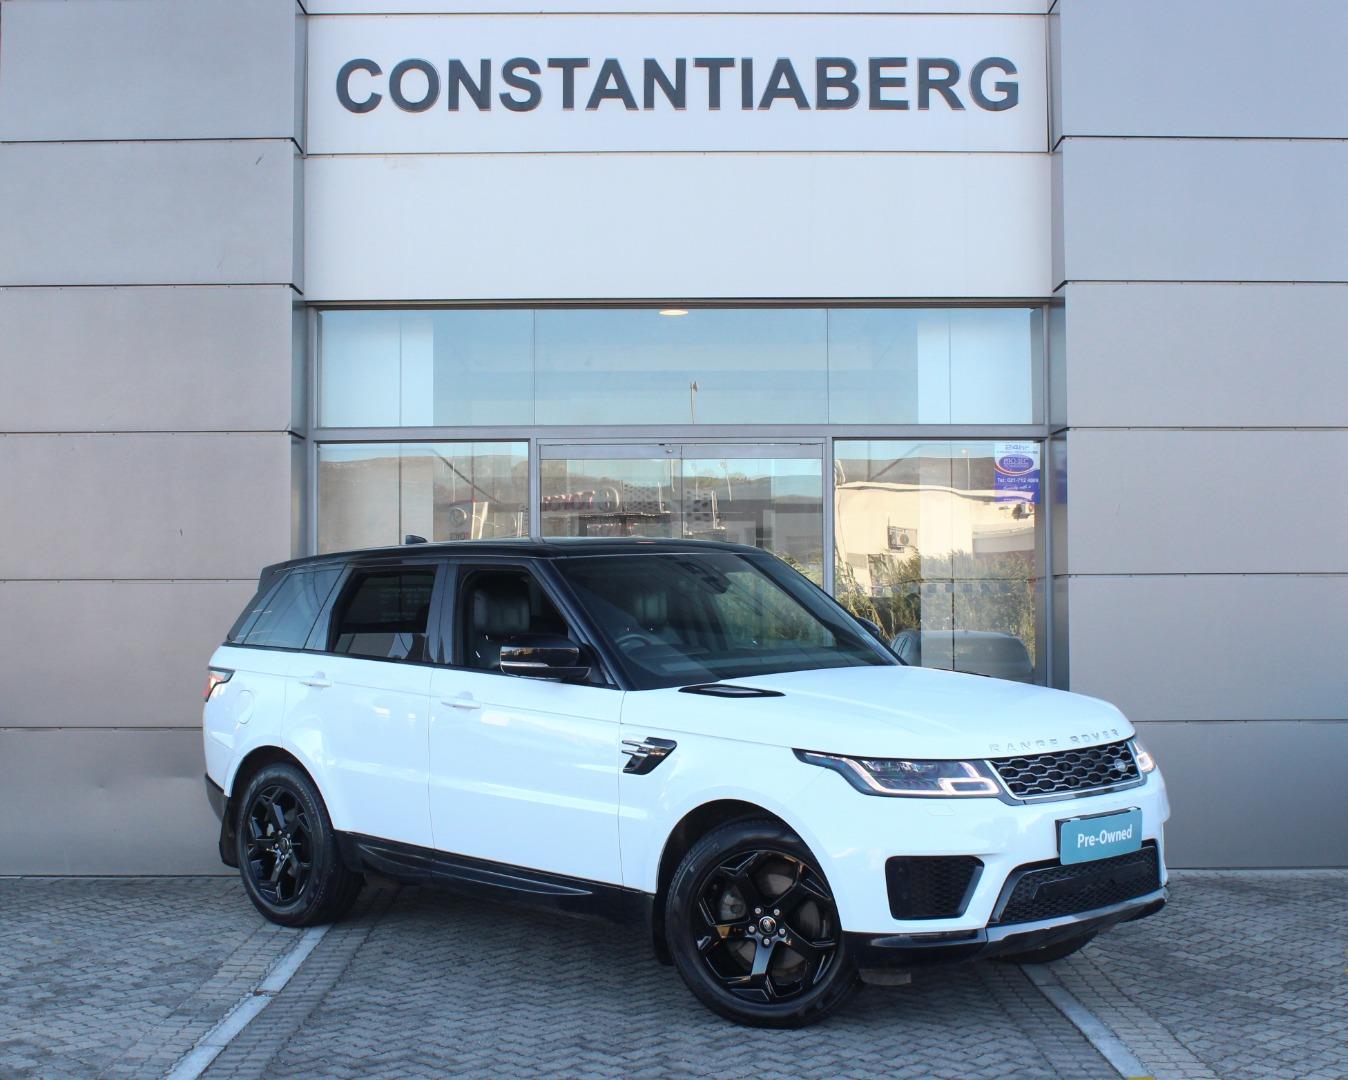 2018 Land Rover Range Rover Sport  for sale - 1112232